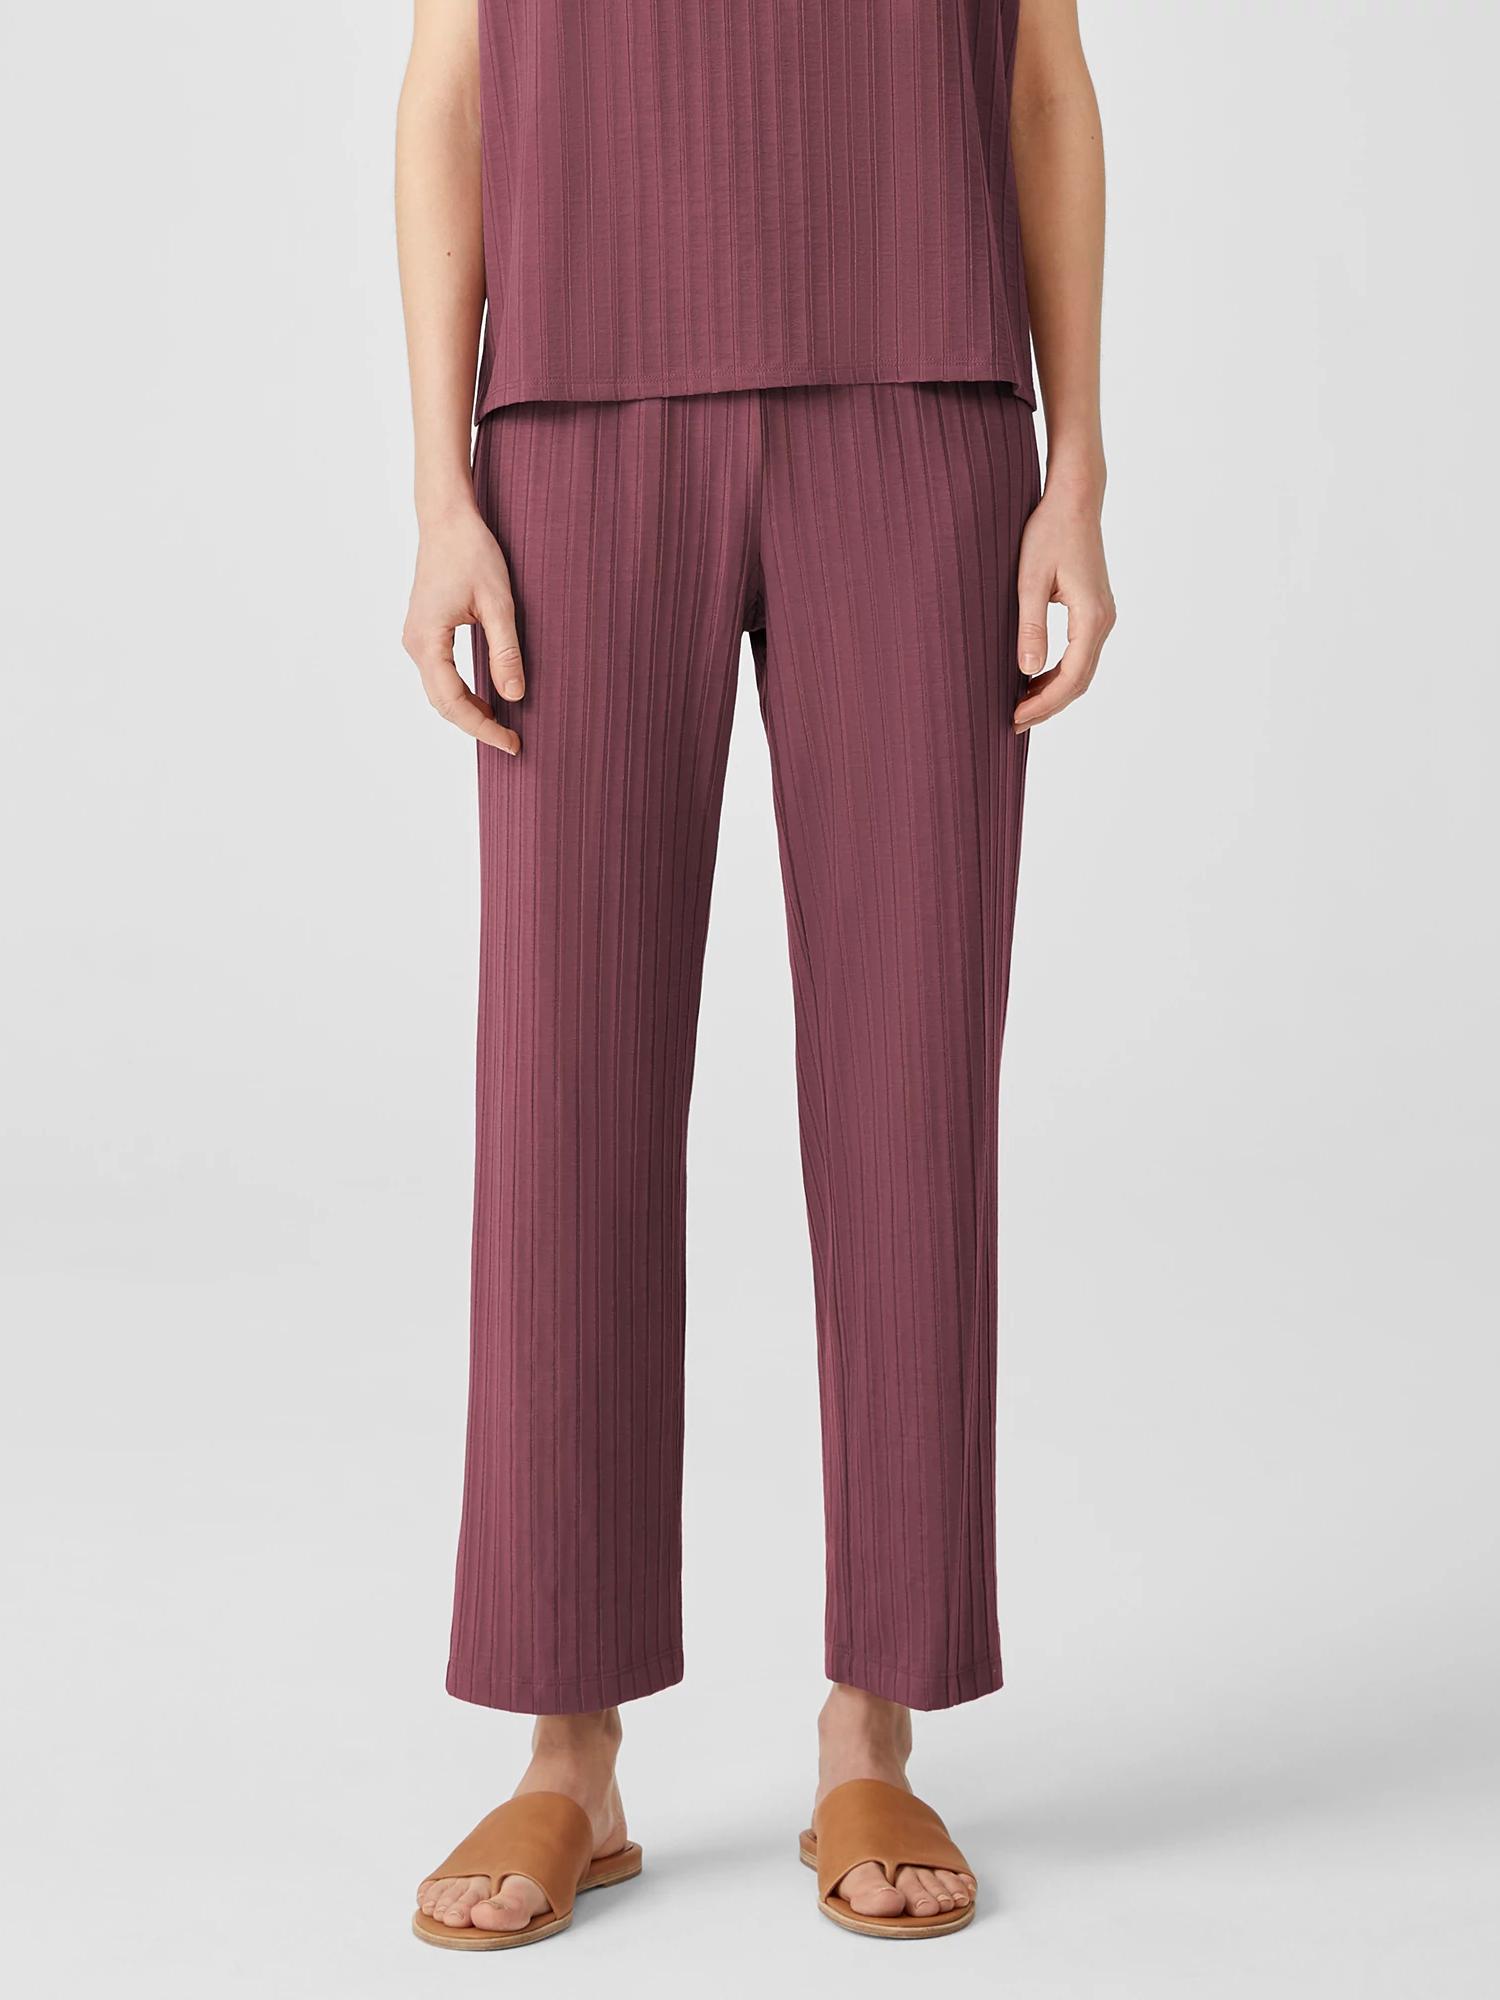 Eileen Fisher Washable Stretch Rib Straight Pant in Red   Lyst